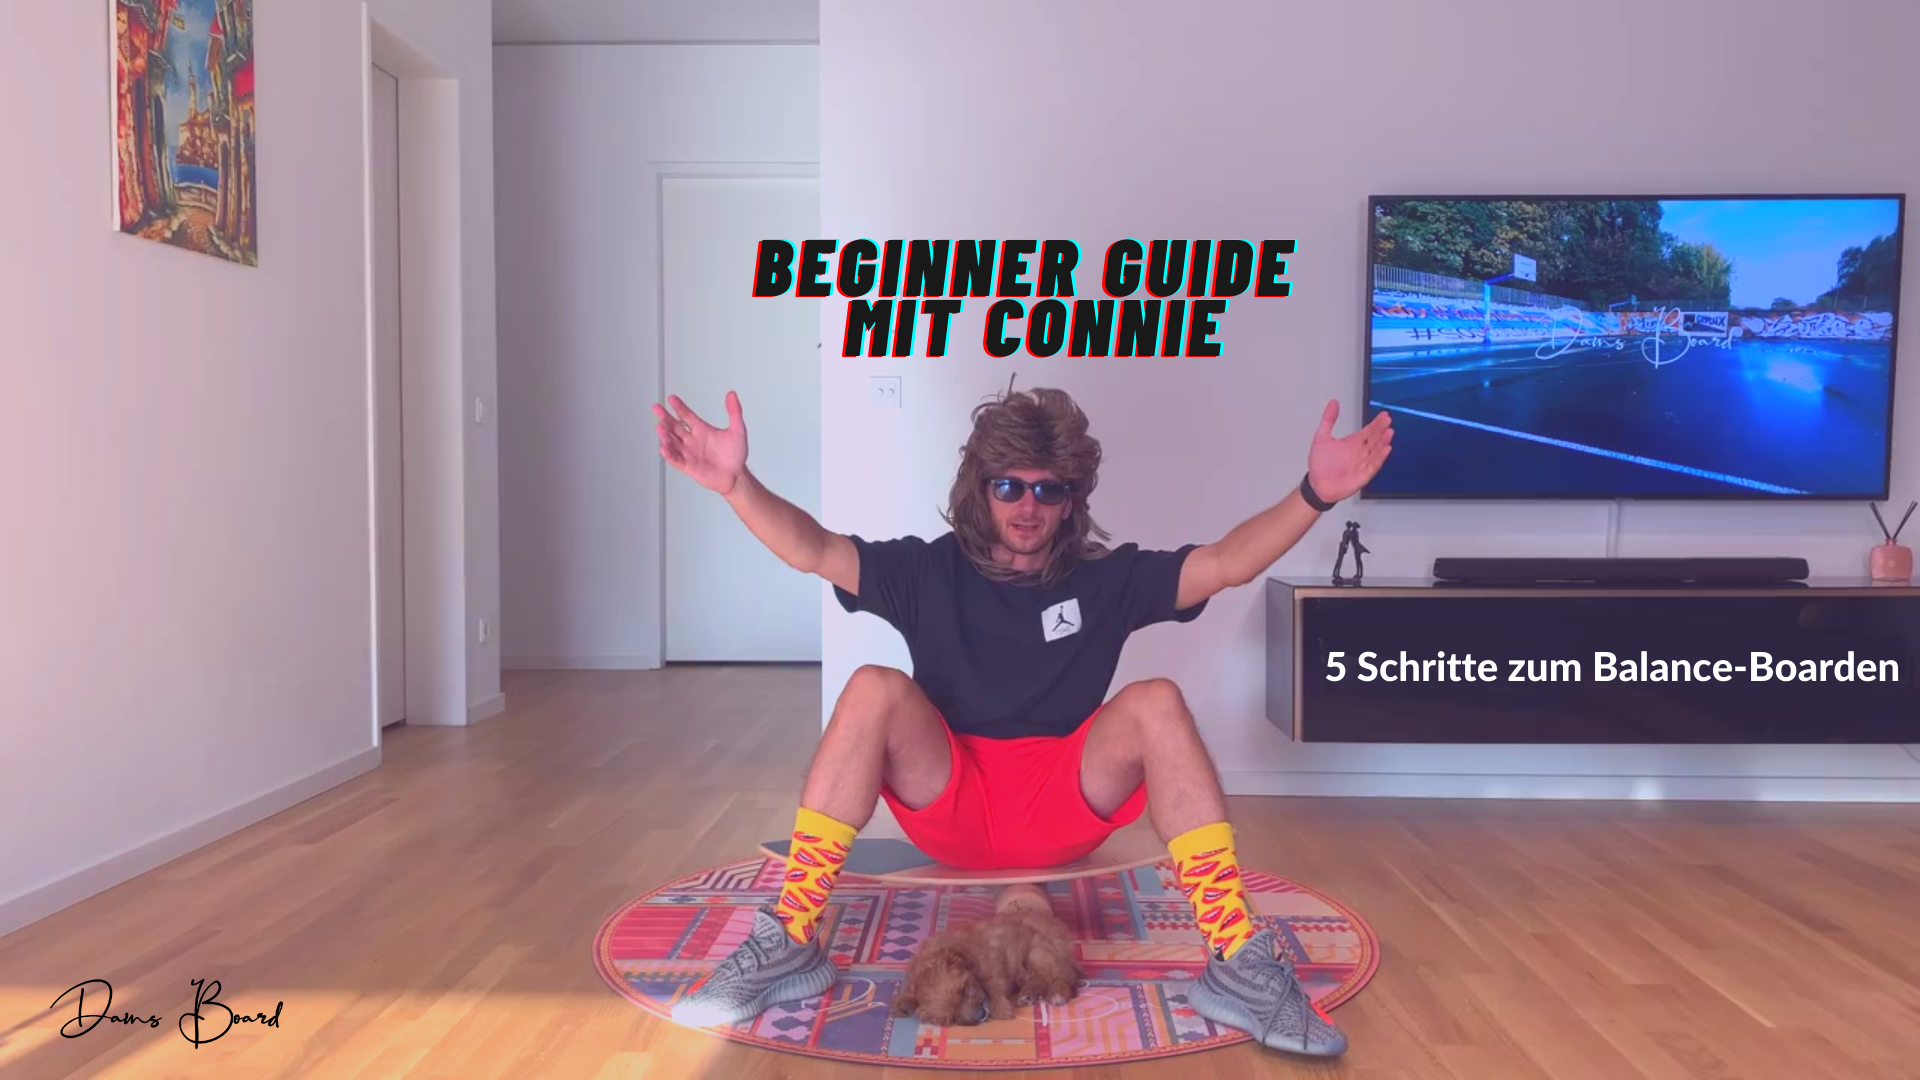 Balance Board Beginners Guide - mit Connie